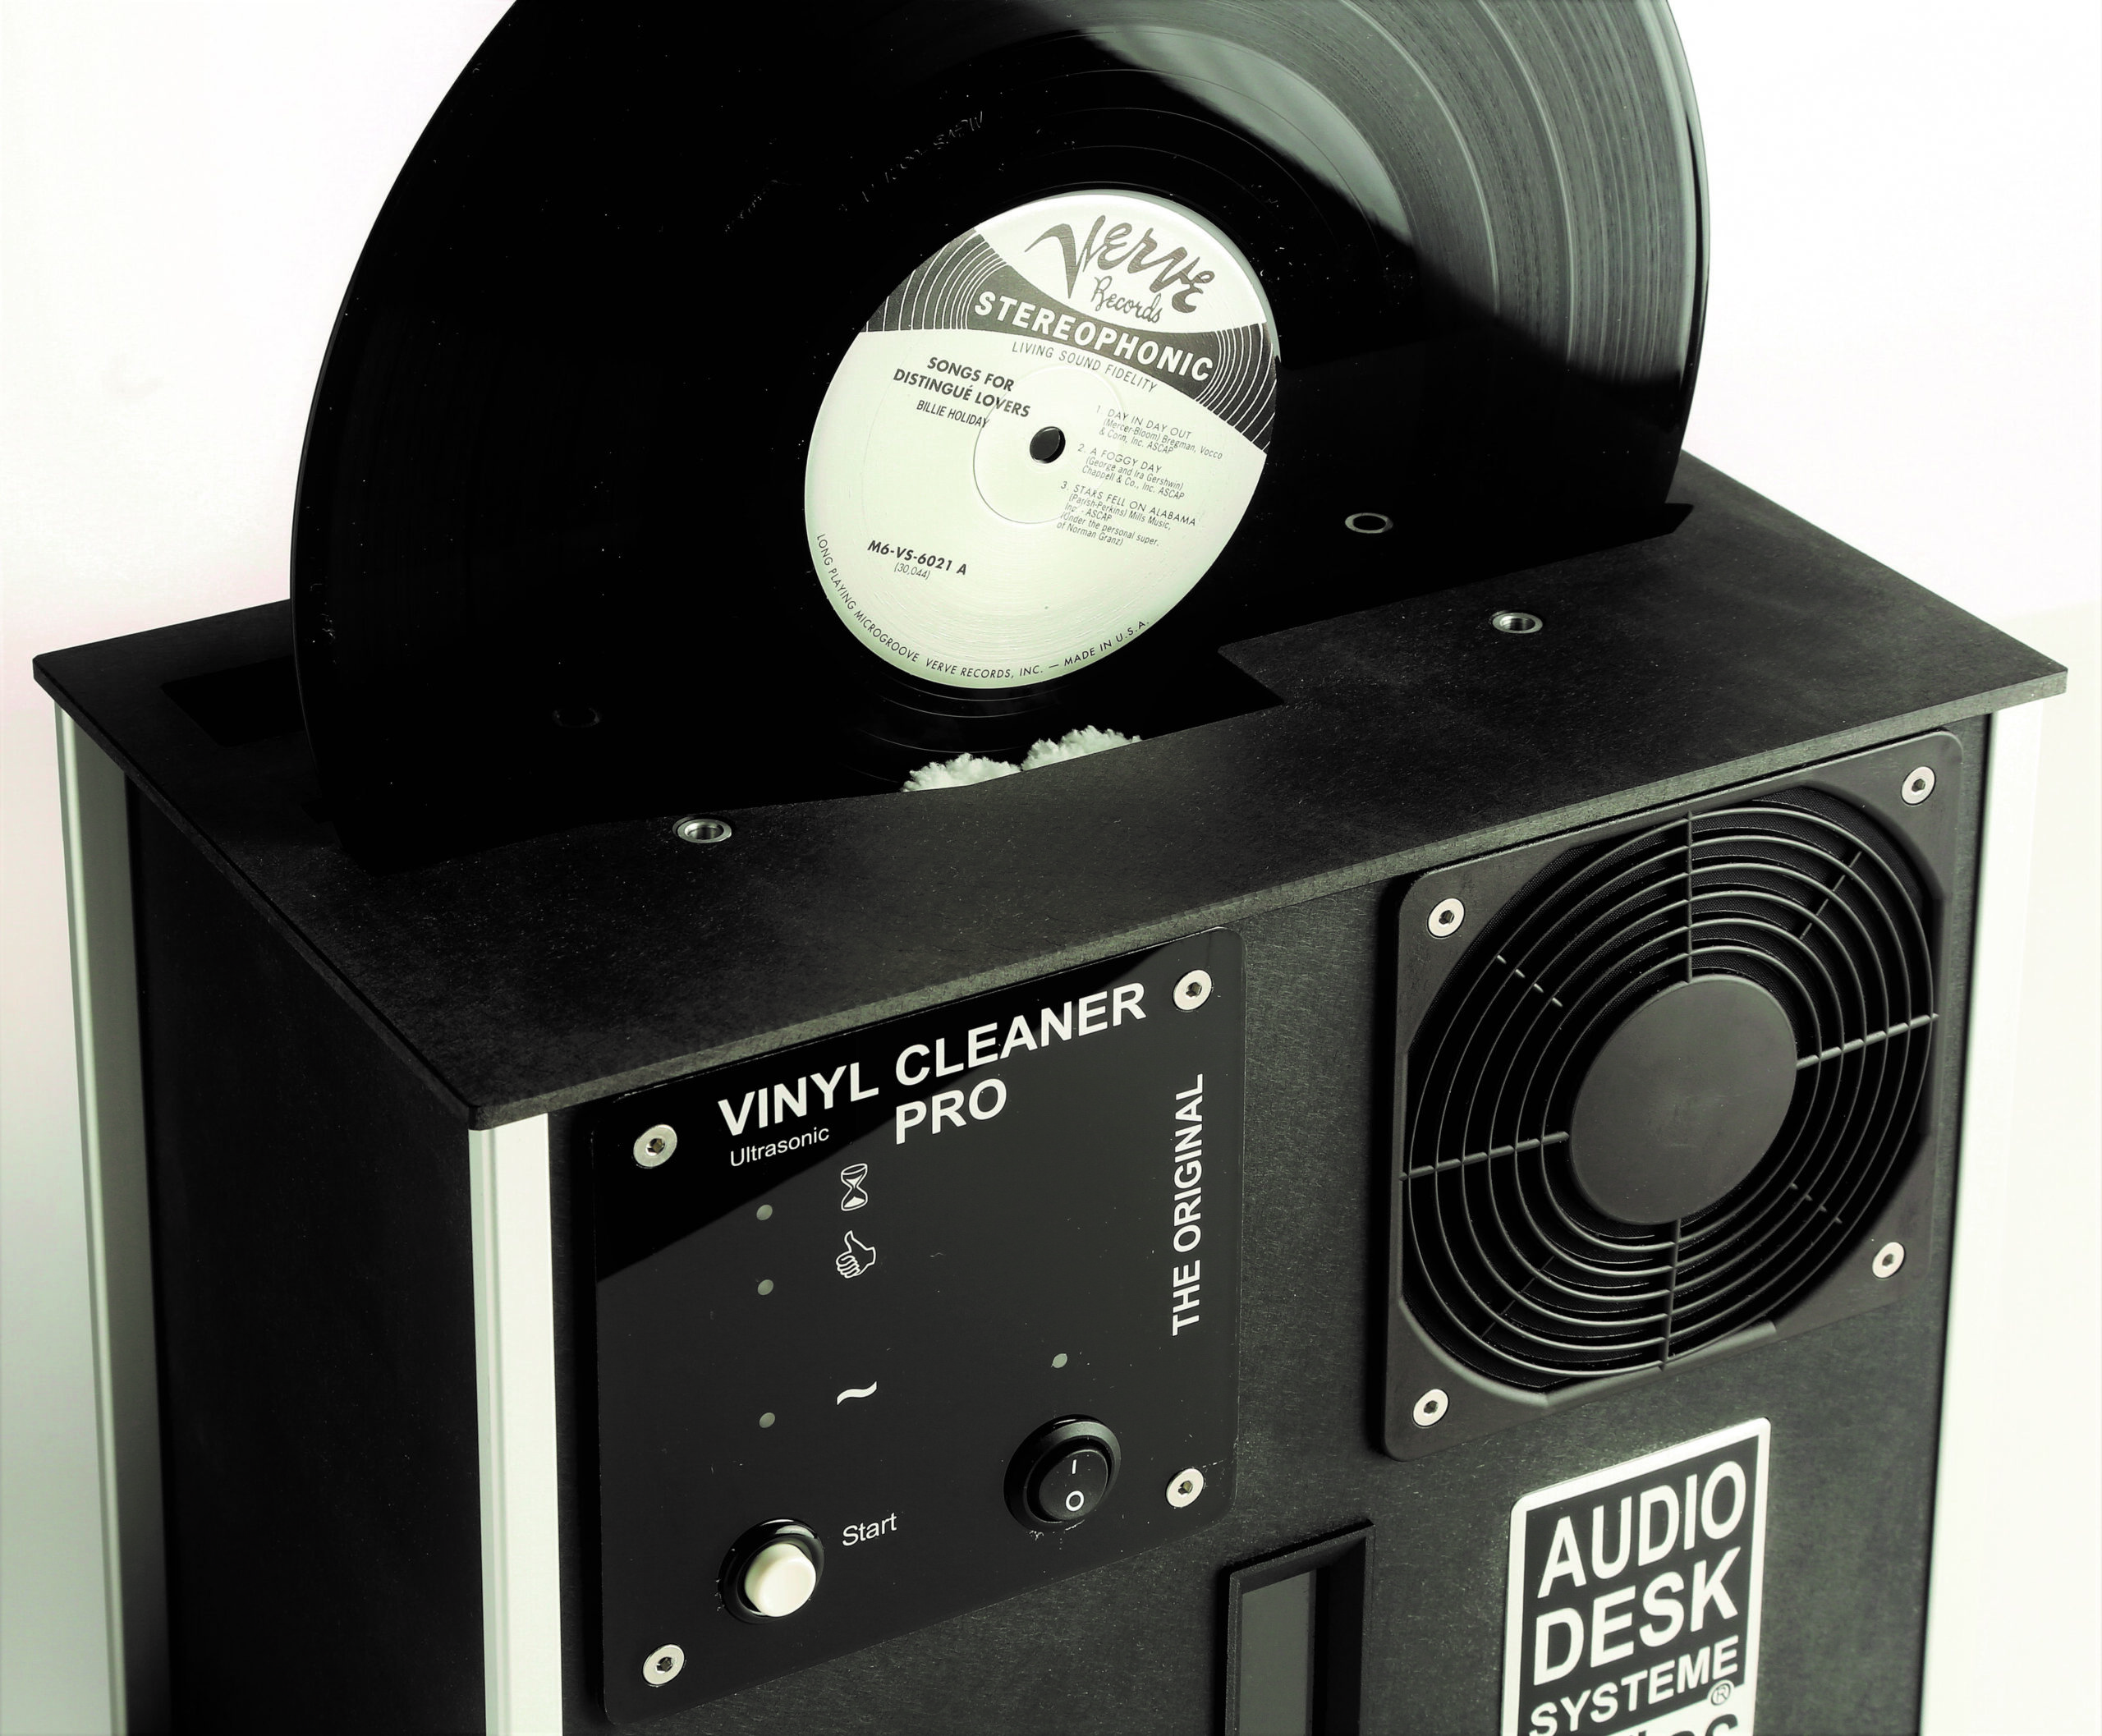 WIN! An Audiodesksysteme Vinyl Cleaner PRO record cleaning machine worth £2,850…and more